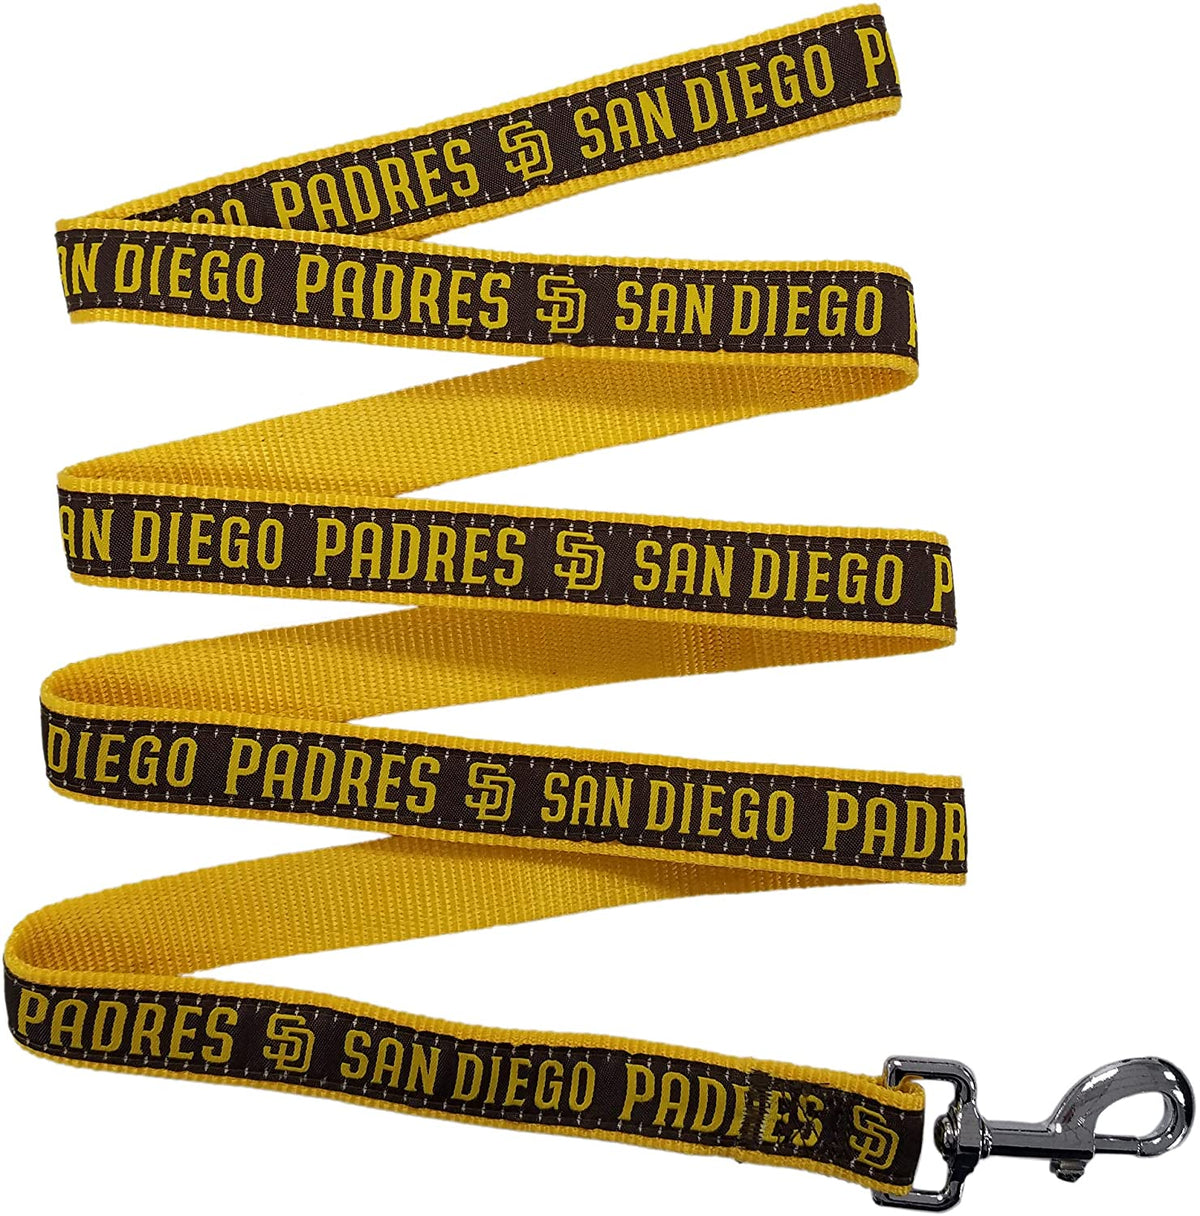 San Diego Padres Dog Collar or Leash - 3 Red Rovers